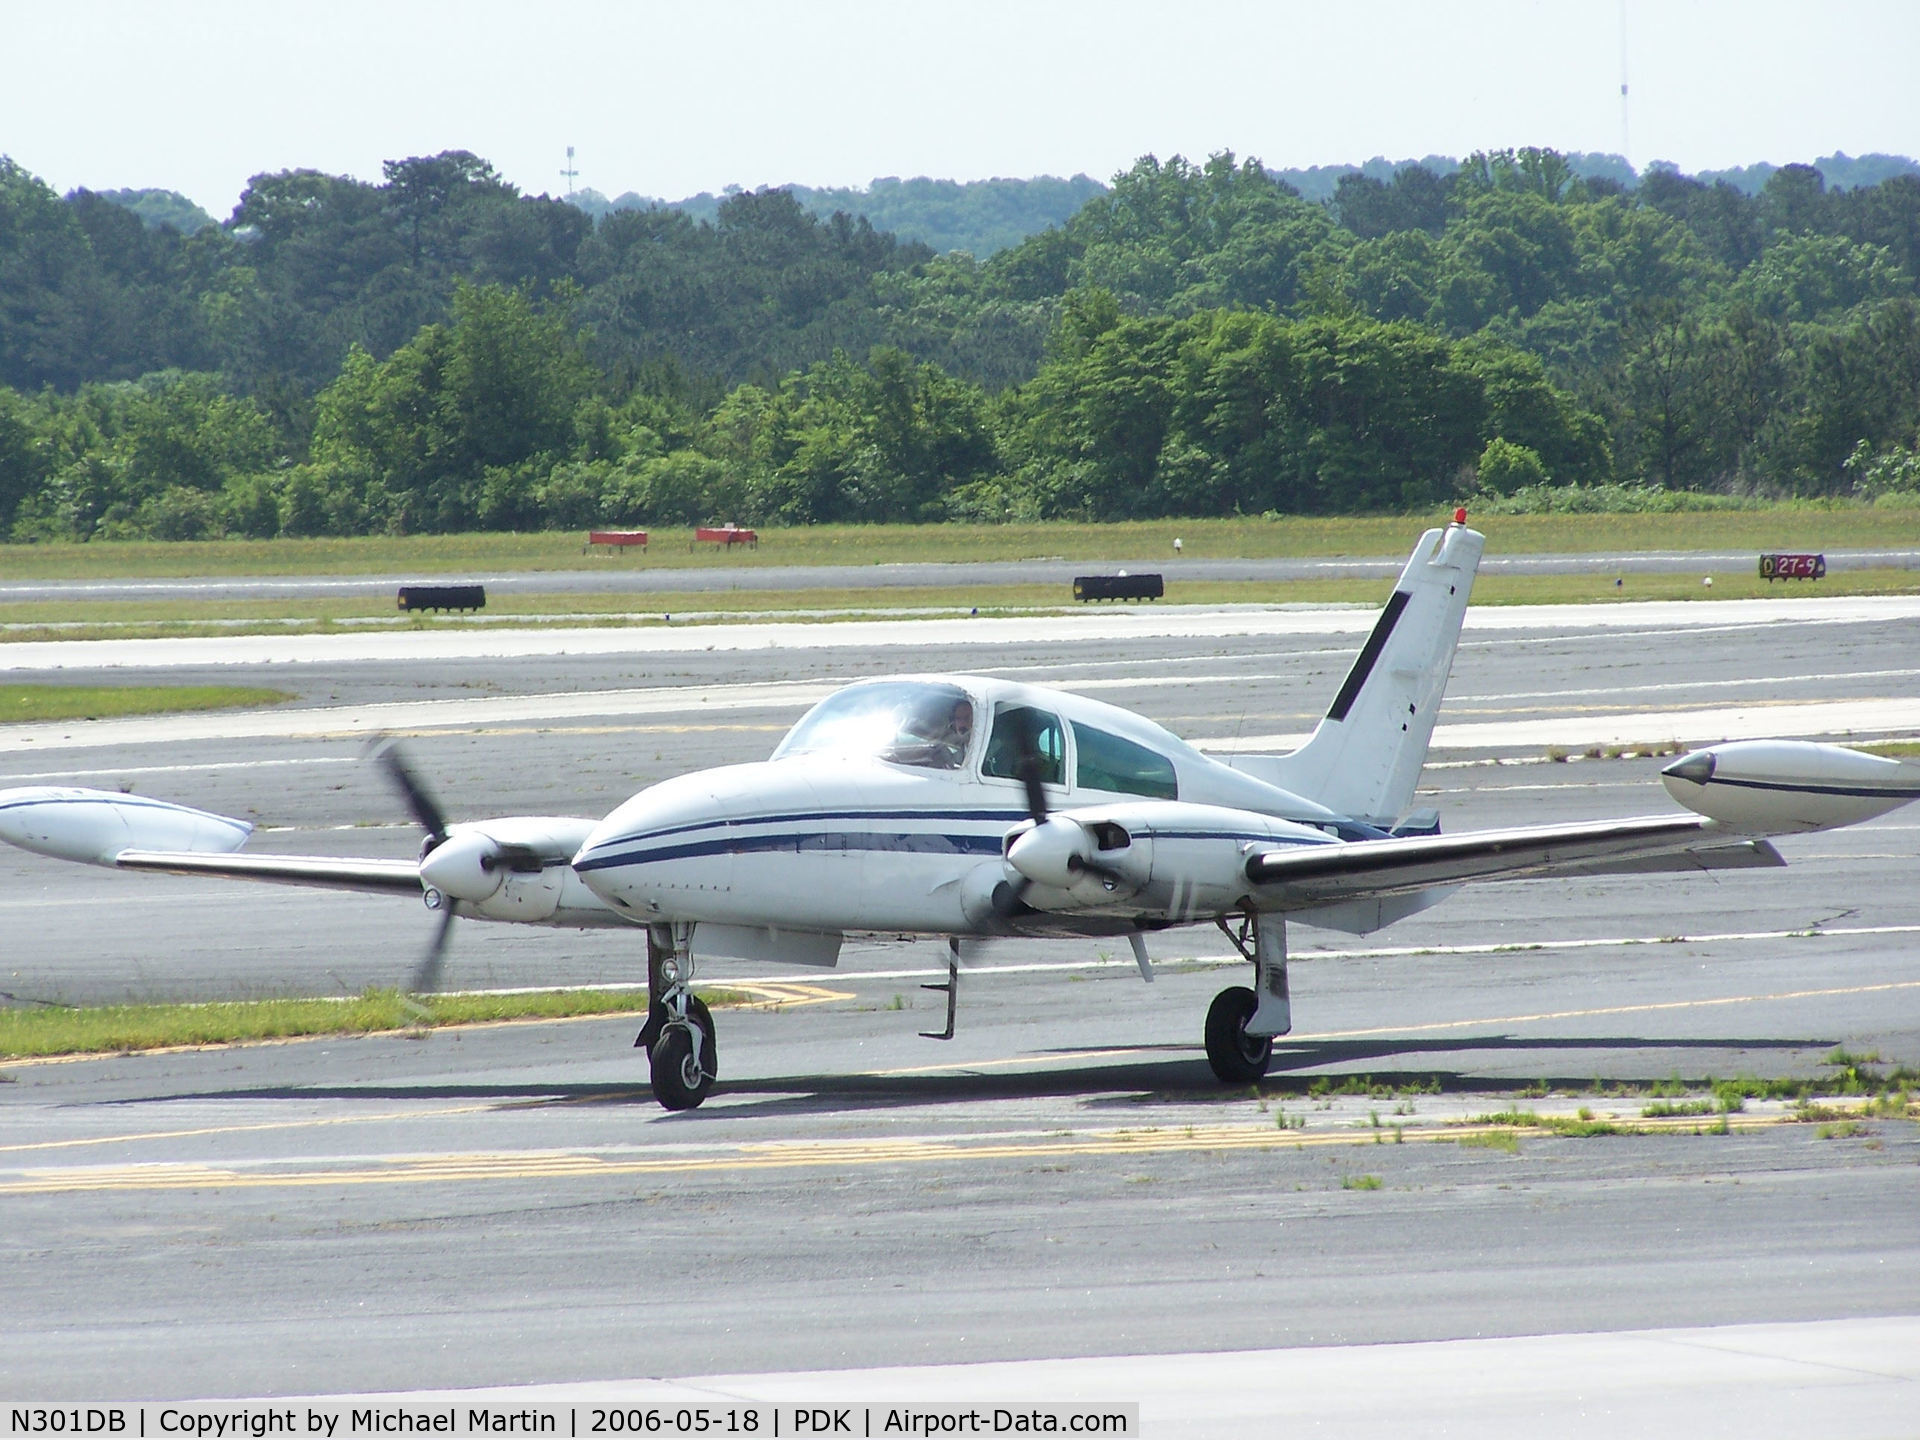 N301DB, 1977 Cessna 310R C/N 310R0891, Taxing to Epps Air Service